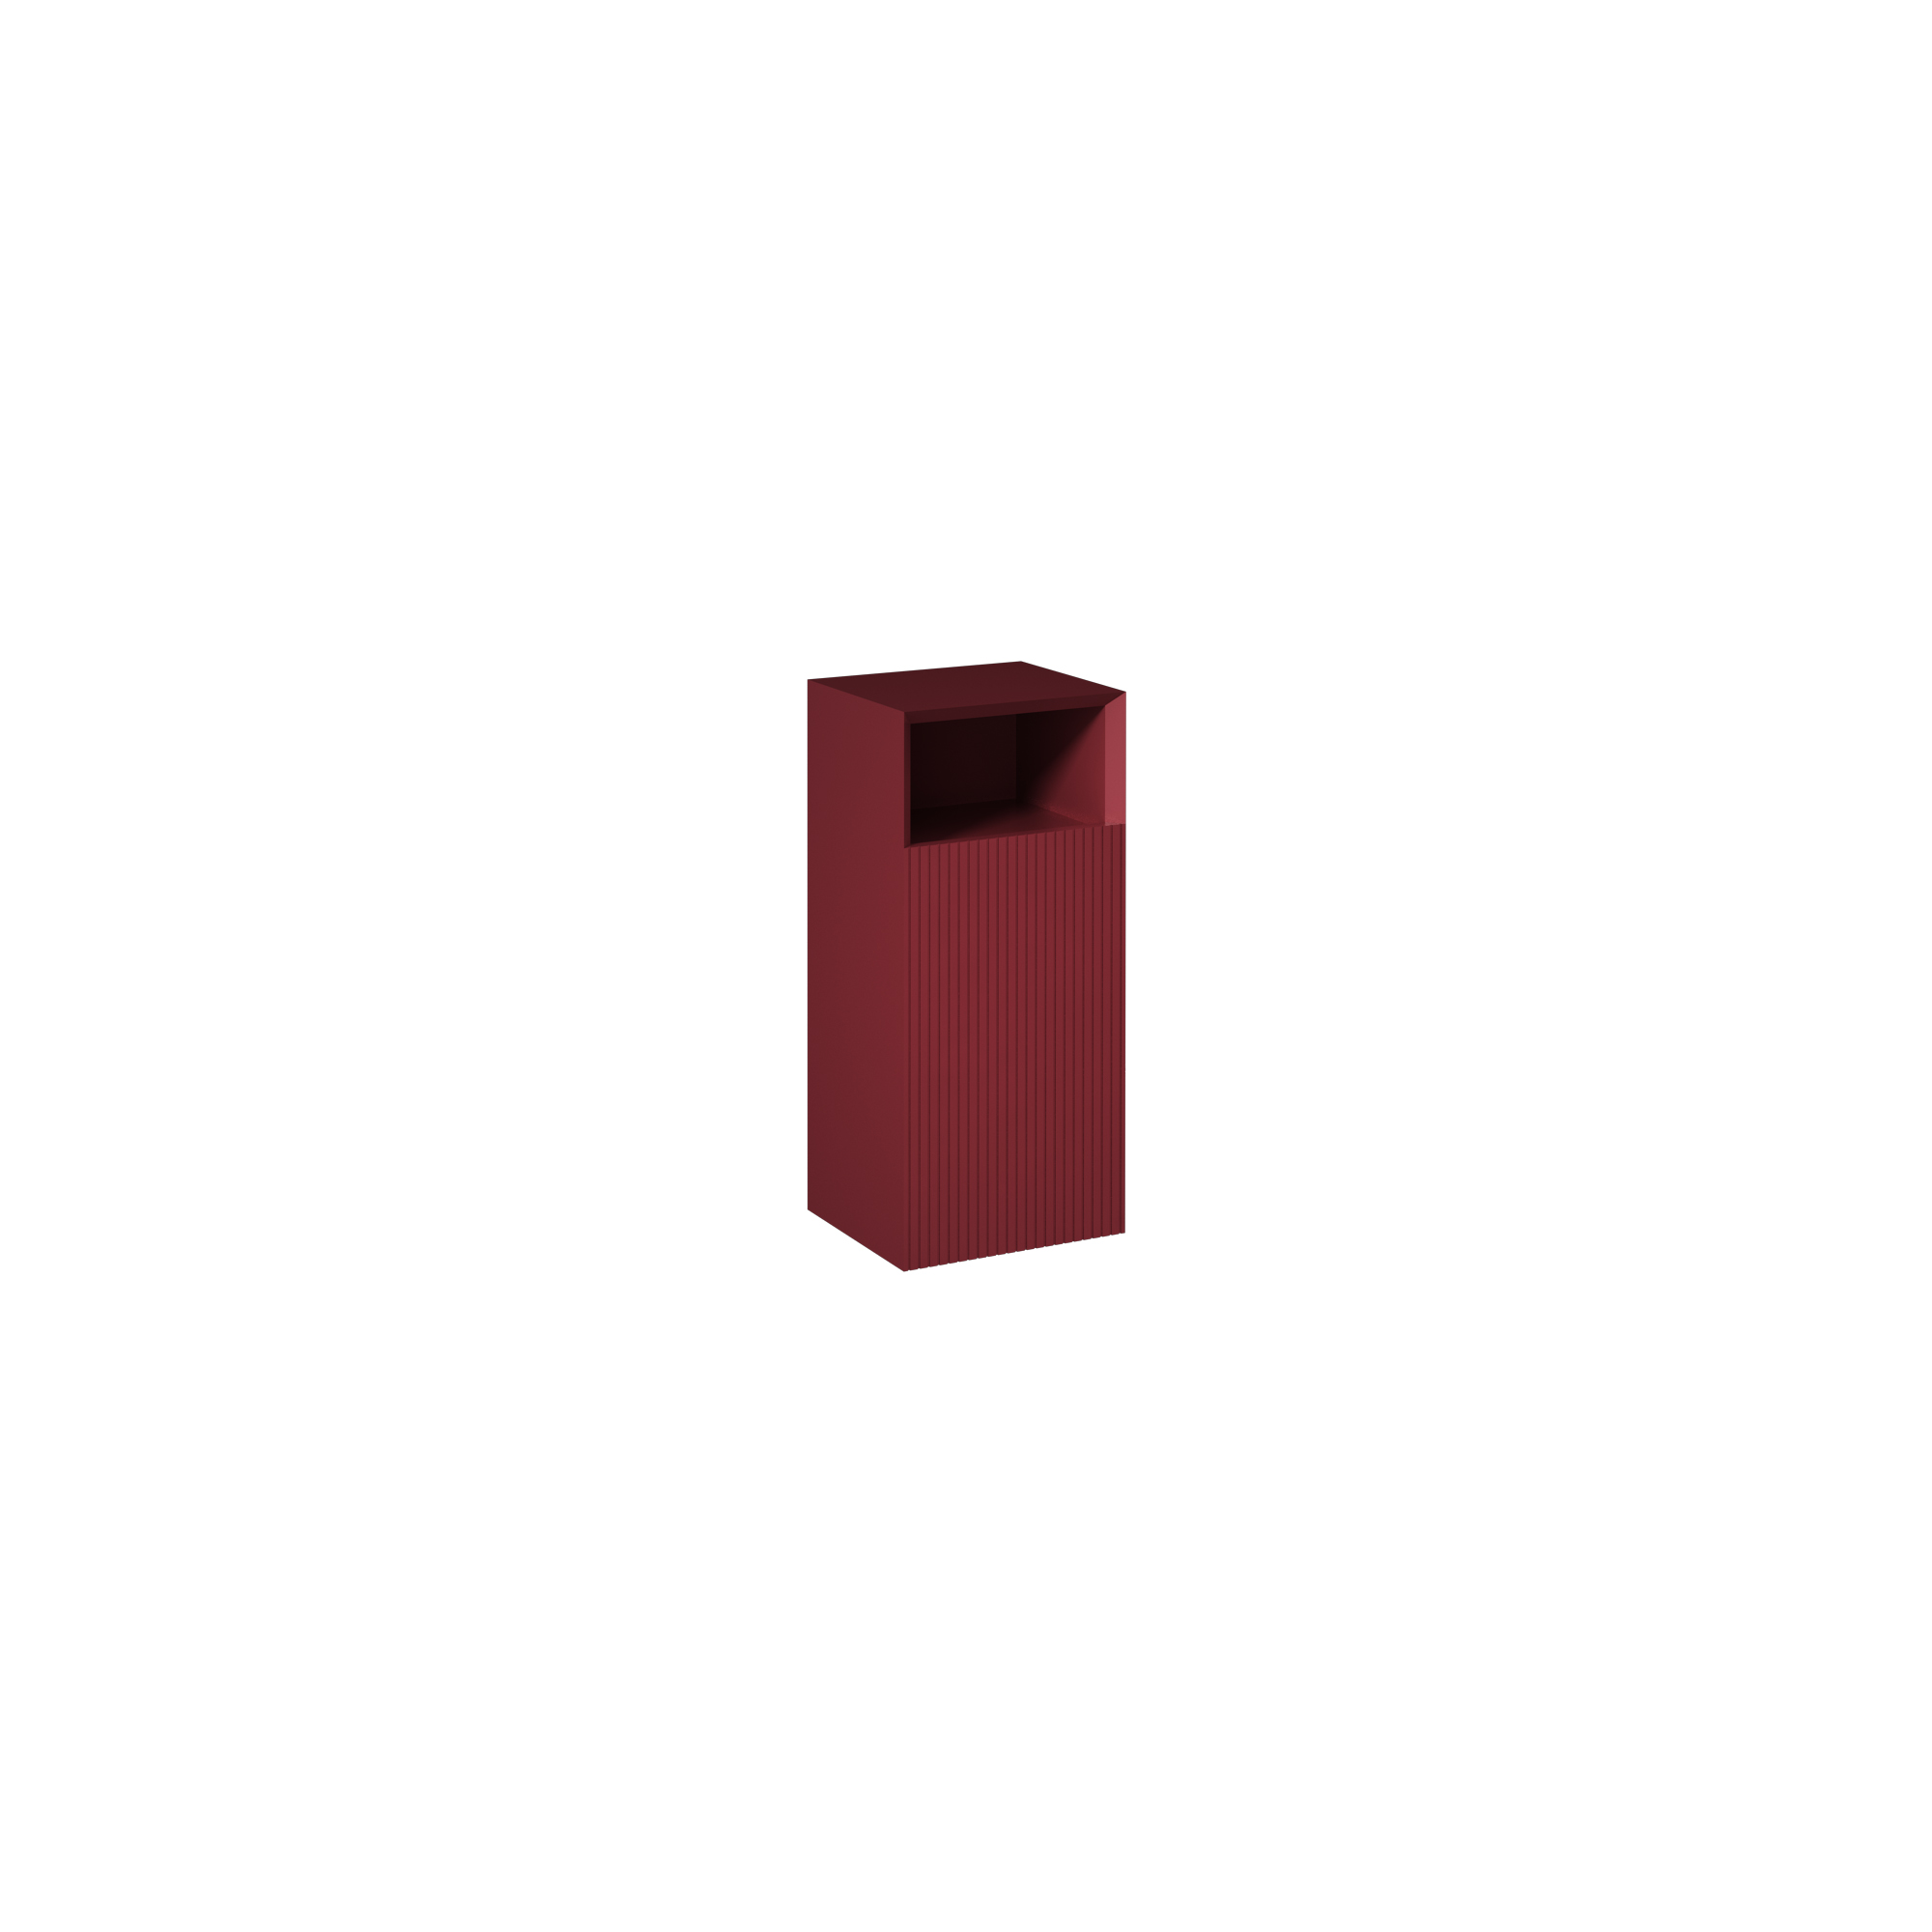 Infinity Washbasin Cabinet Ruby Red, with Rustic Maroon Washbasin 39"